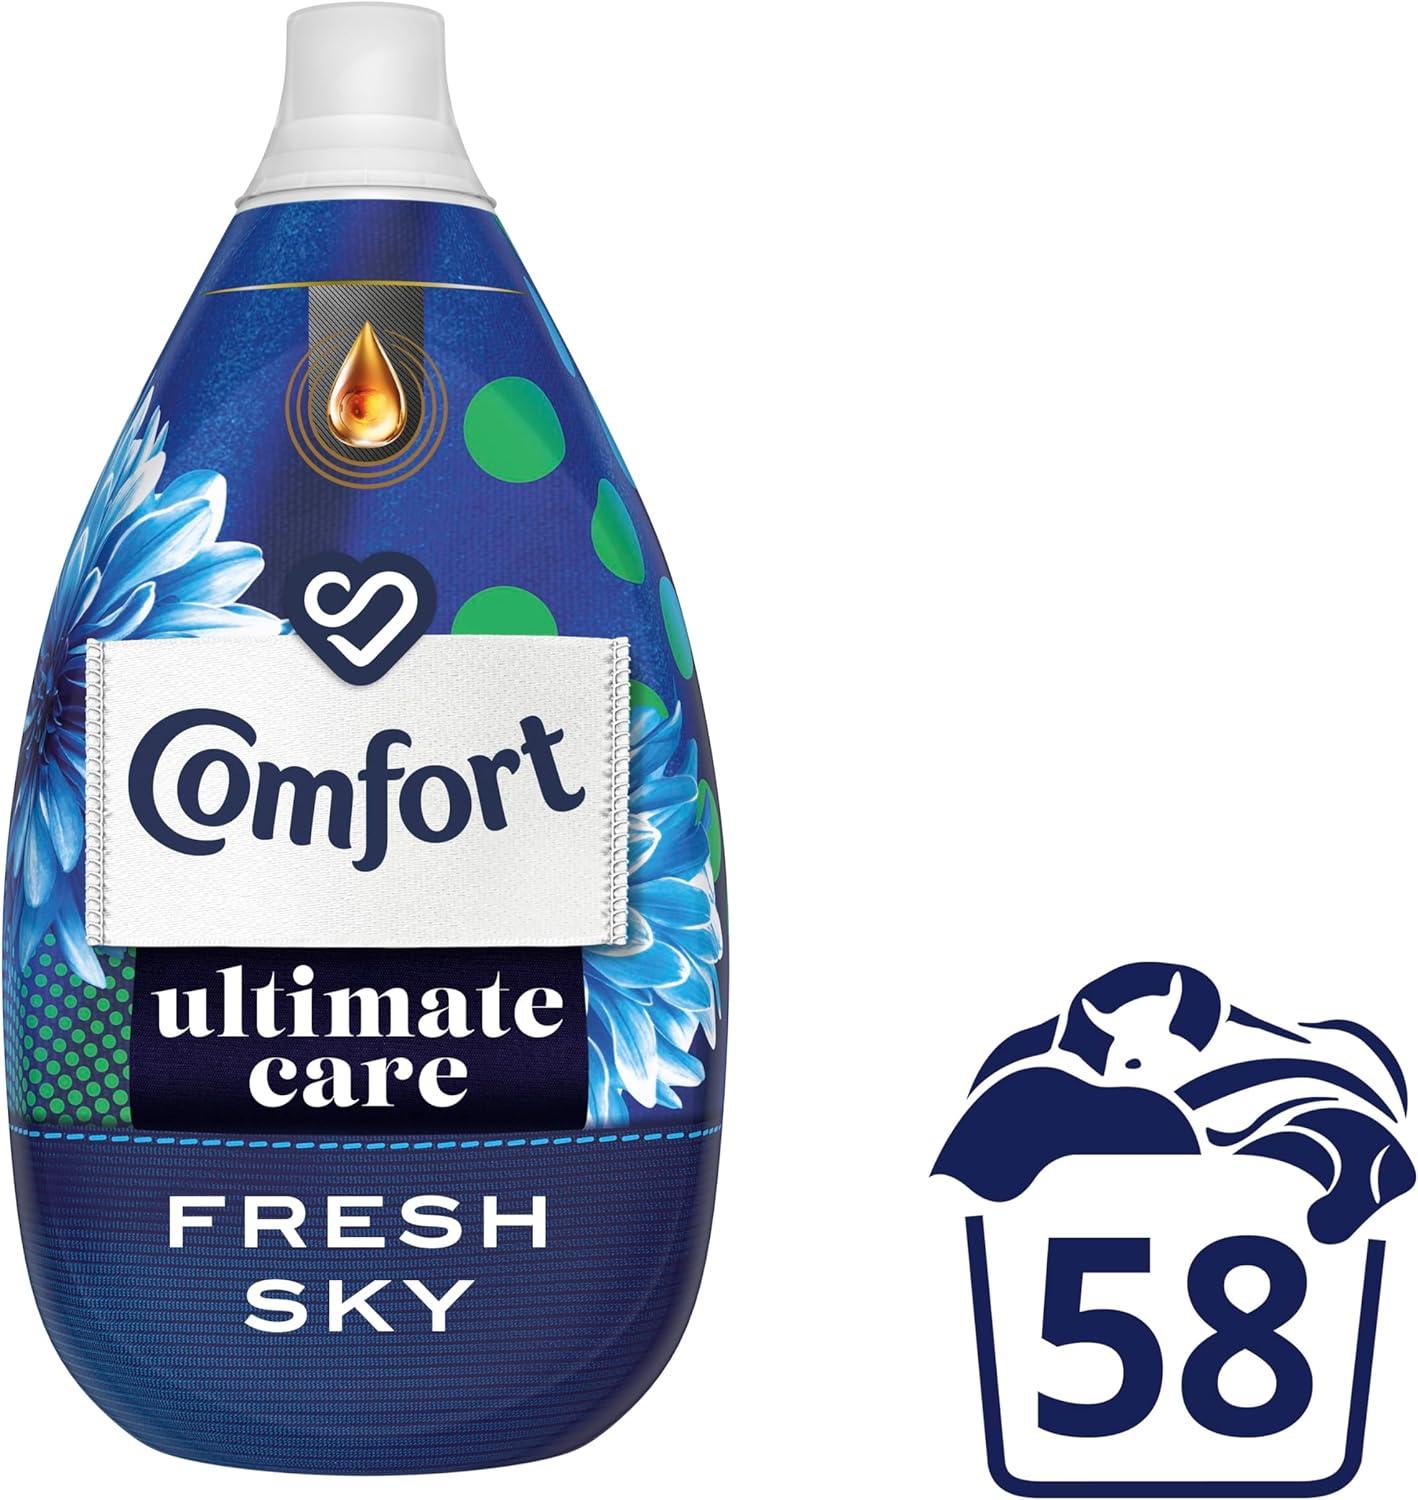 Comfort Ultimate Care Fresh Sky Ultra-Concentrated Fabric